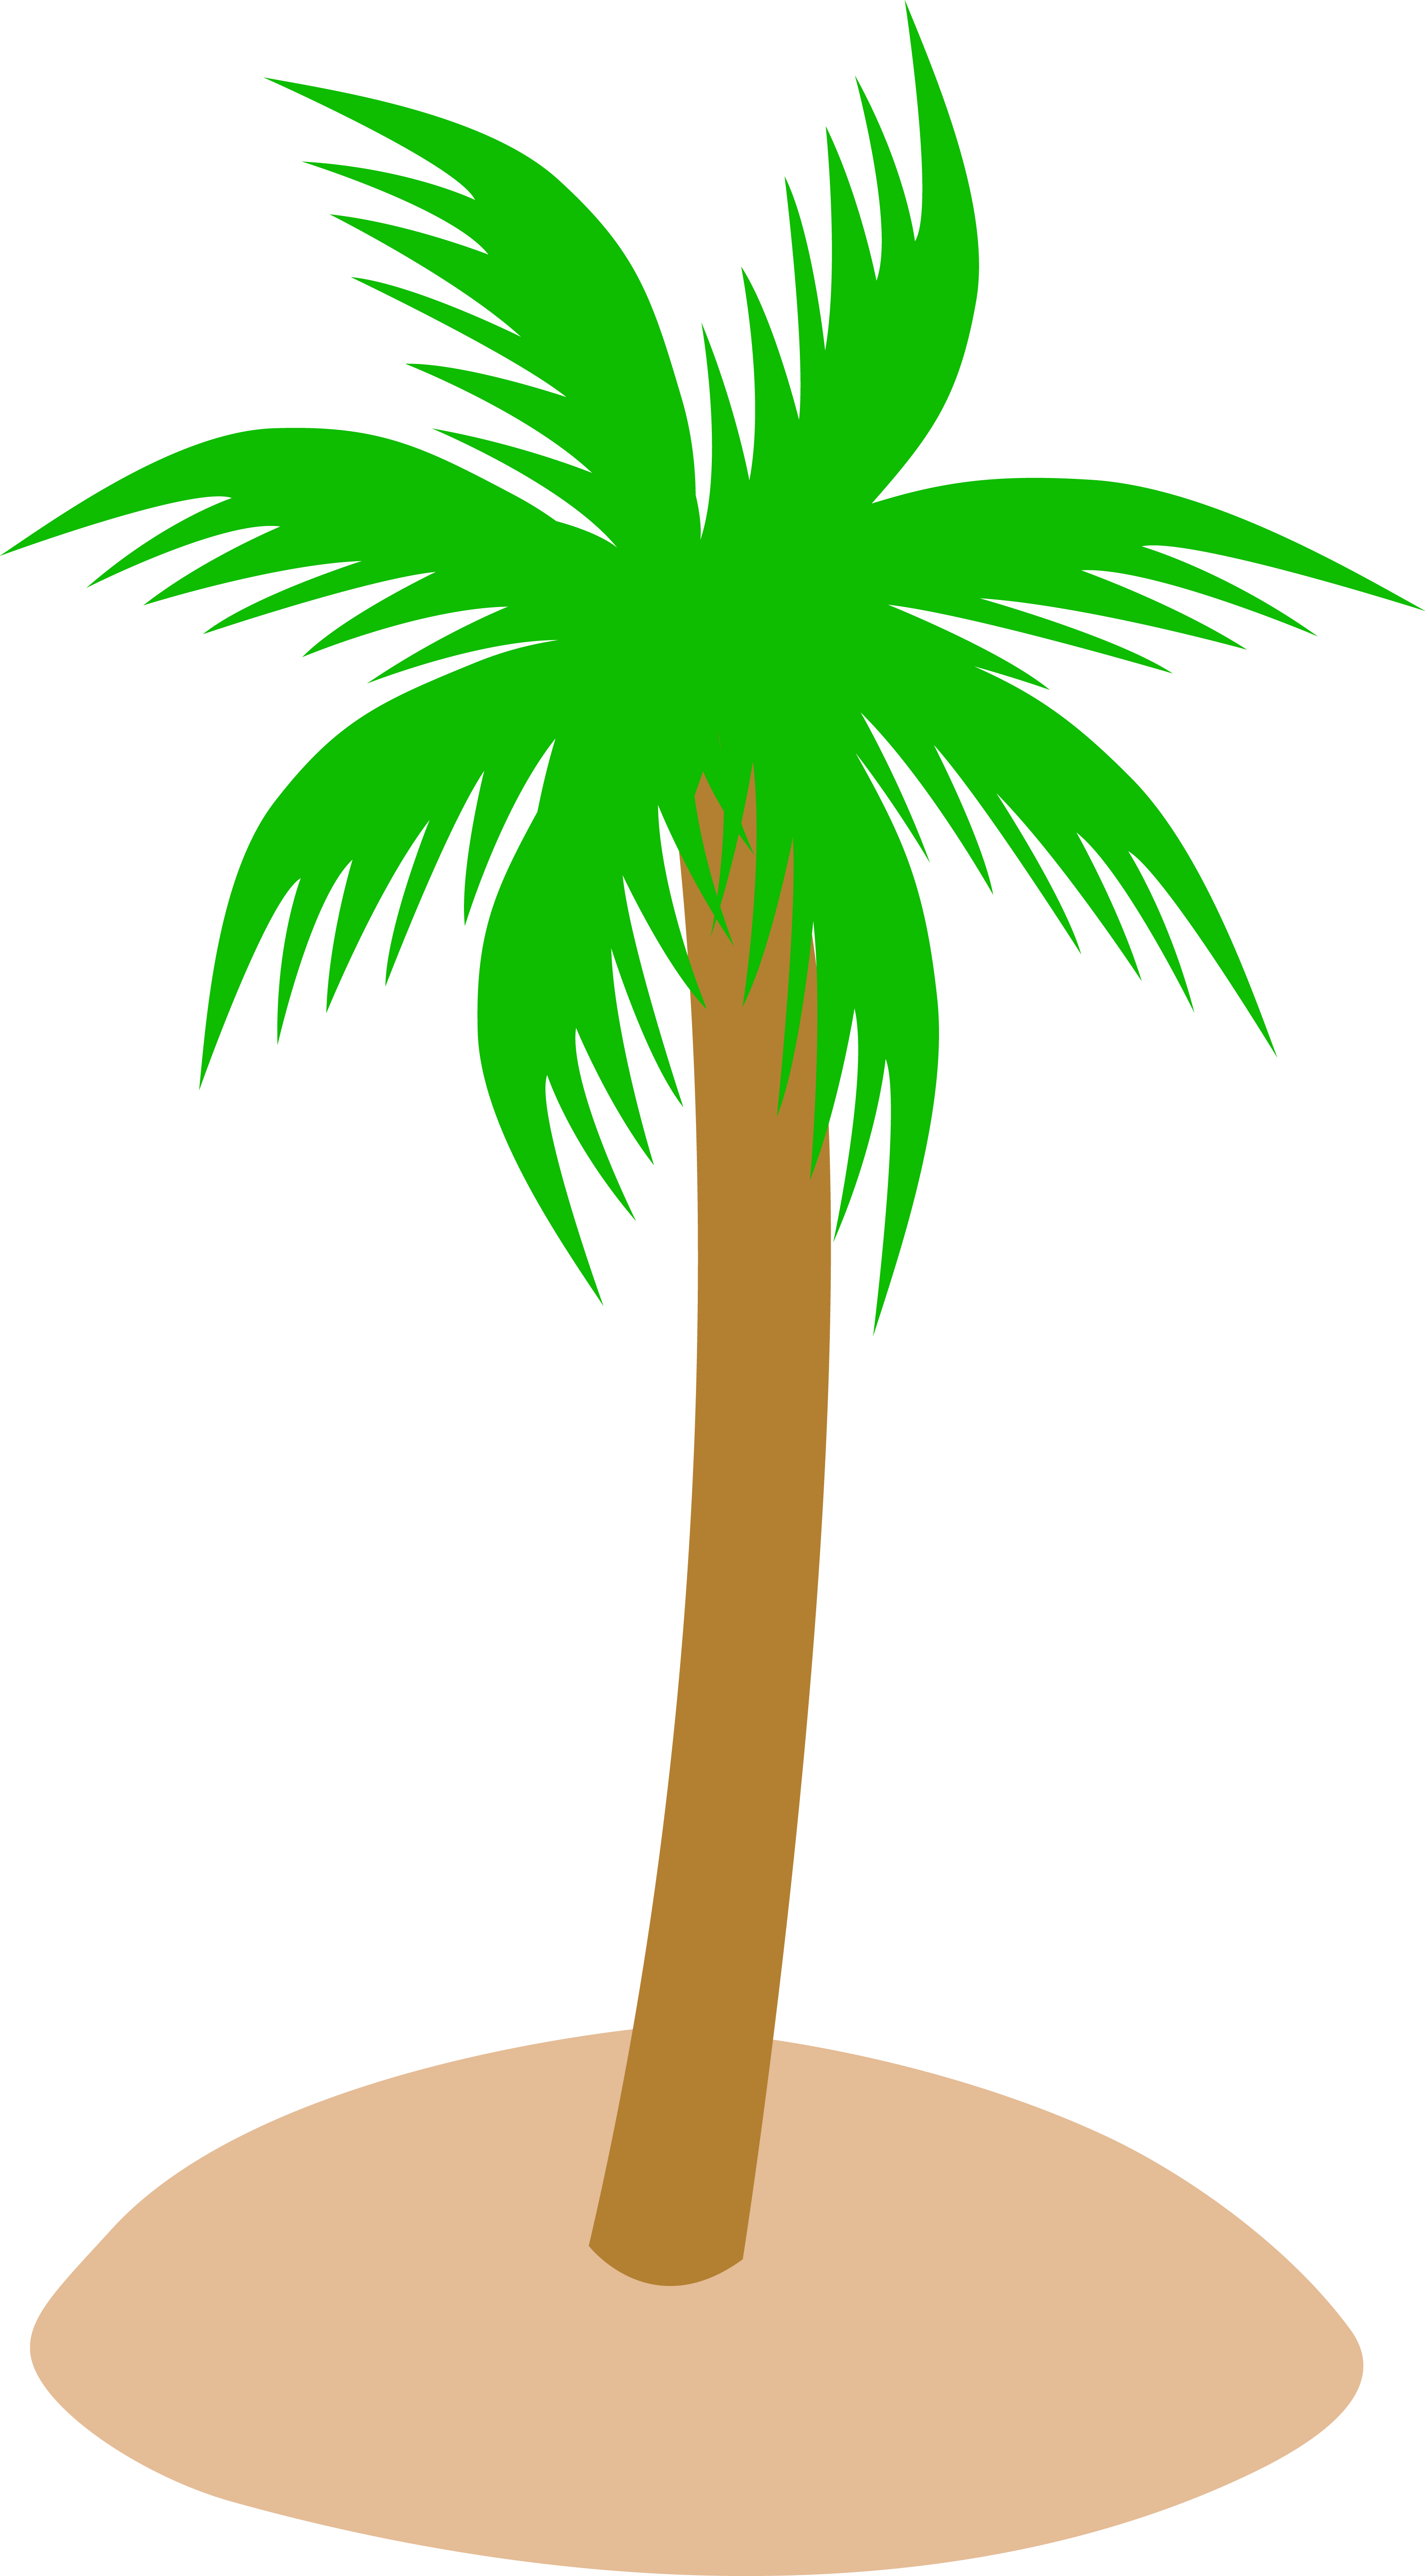 Free Cartoon Palm Tree Images, Download Free Clip Art, Free